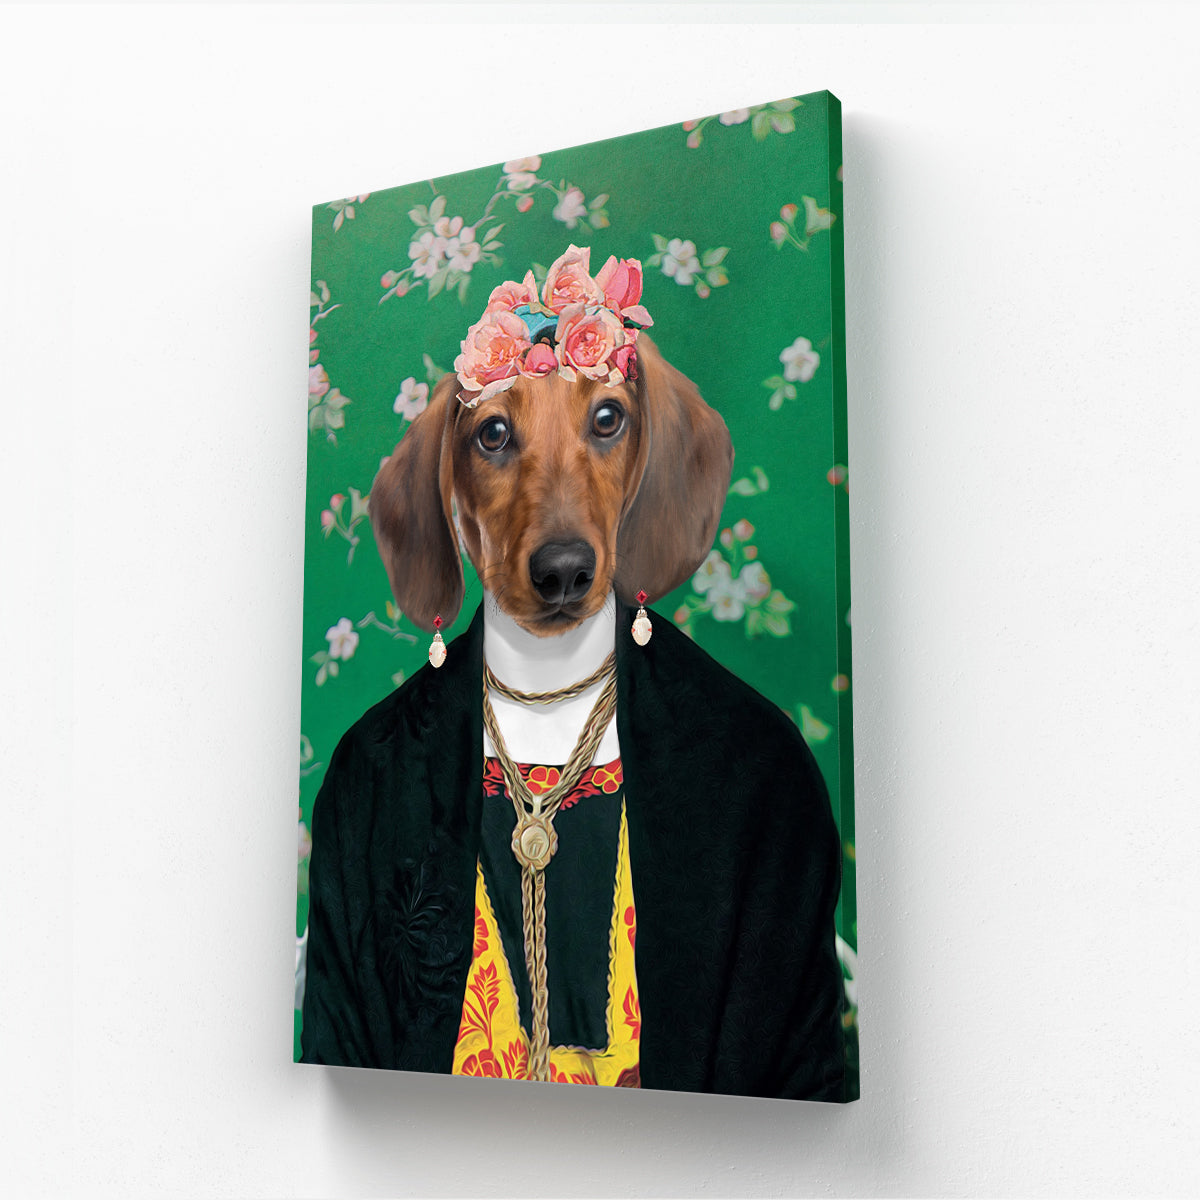 Paw & Glory, paw and glory, funny dog paintings, drawing pictures of pets, dog portraits singapore, minimal dog art, pet photo clothing, animal portrait pictures, pet portrait